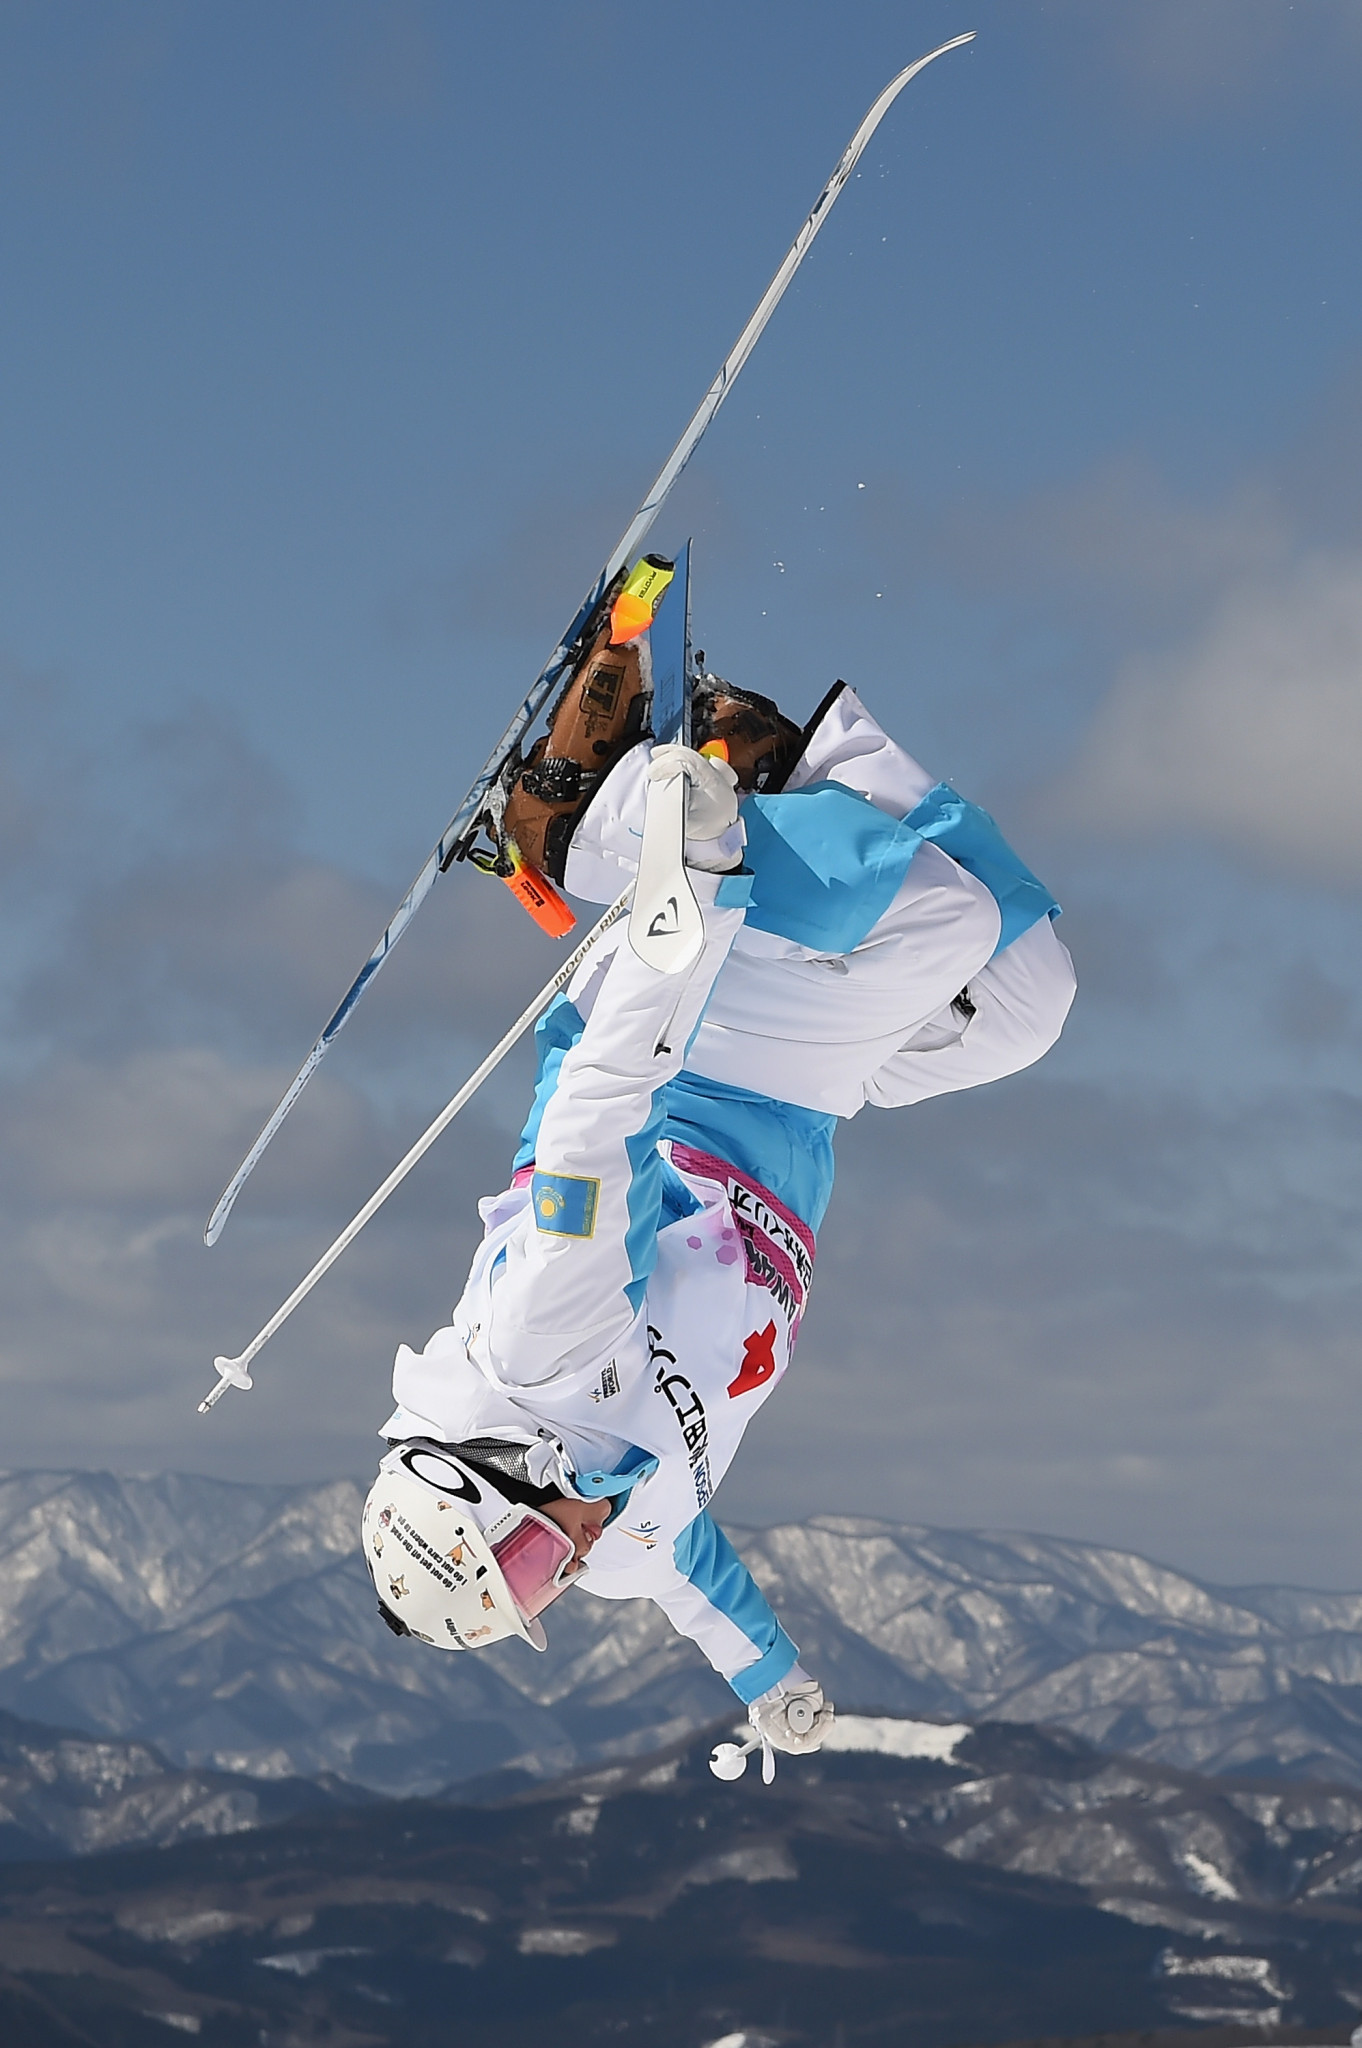 Kazakhstan’s Yulia Galysheva delighted the home crowd by winning the women’s singles event on day one of the FIS Moguls World Cup at Shymbulak Mountain Resort ©Getty Images